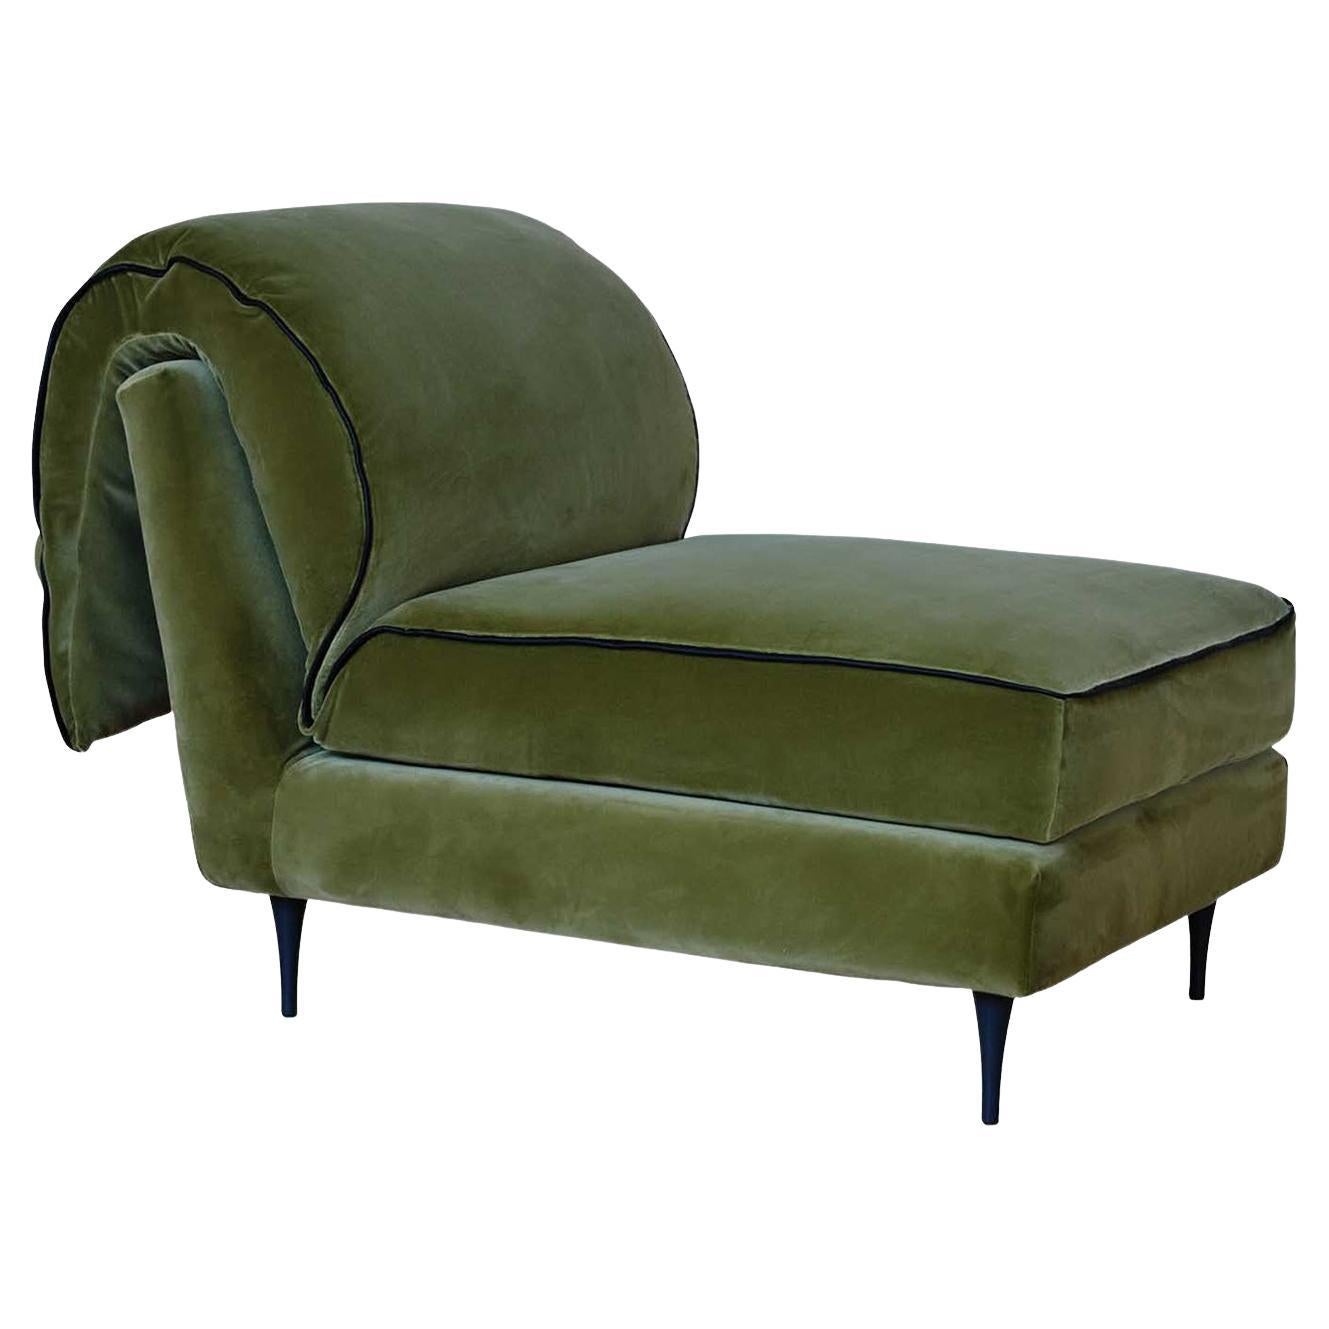 Casquet Mini in Olive Green Velvet Daybed For Sale